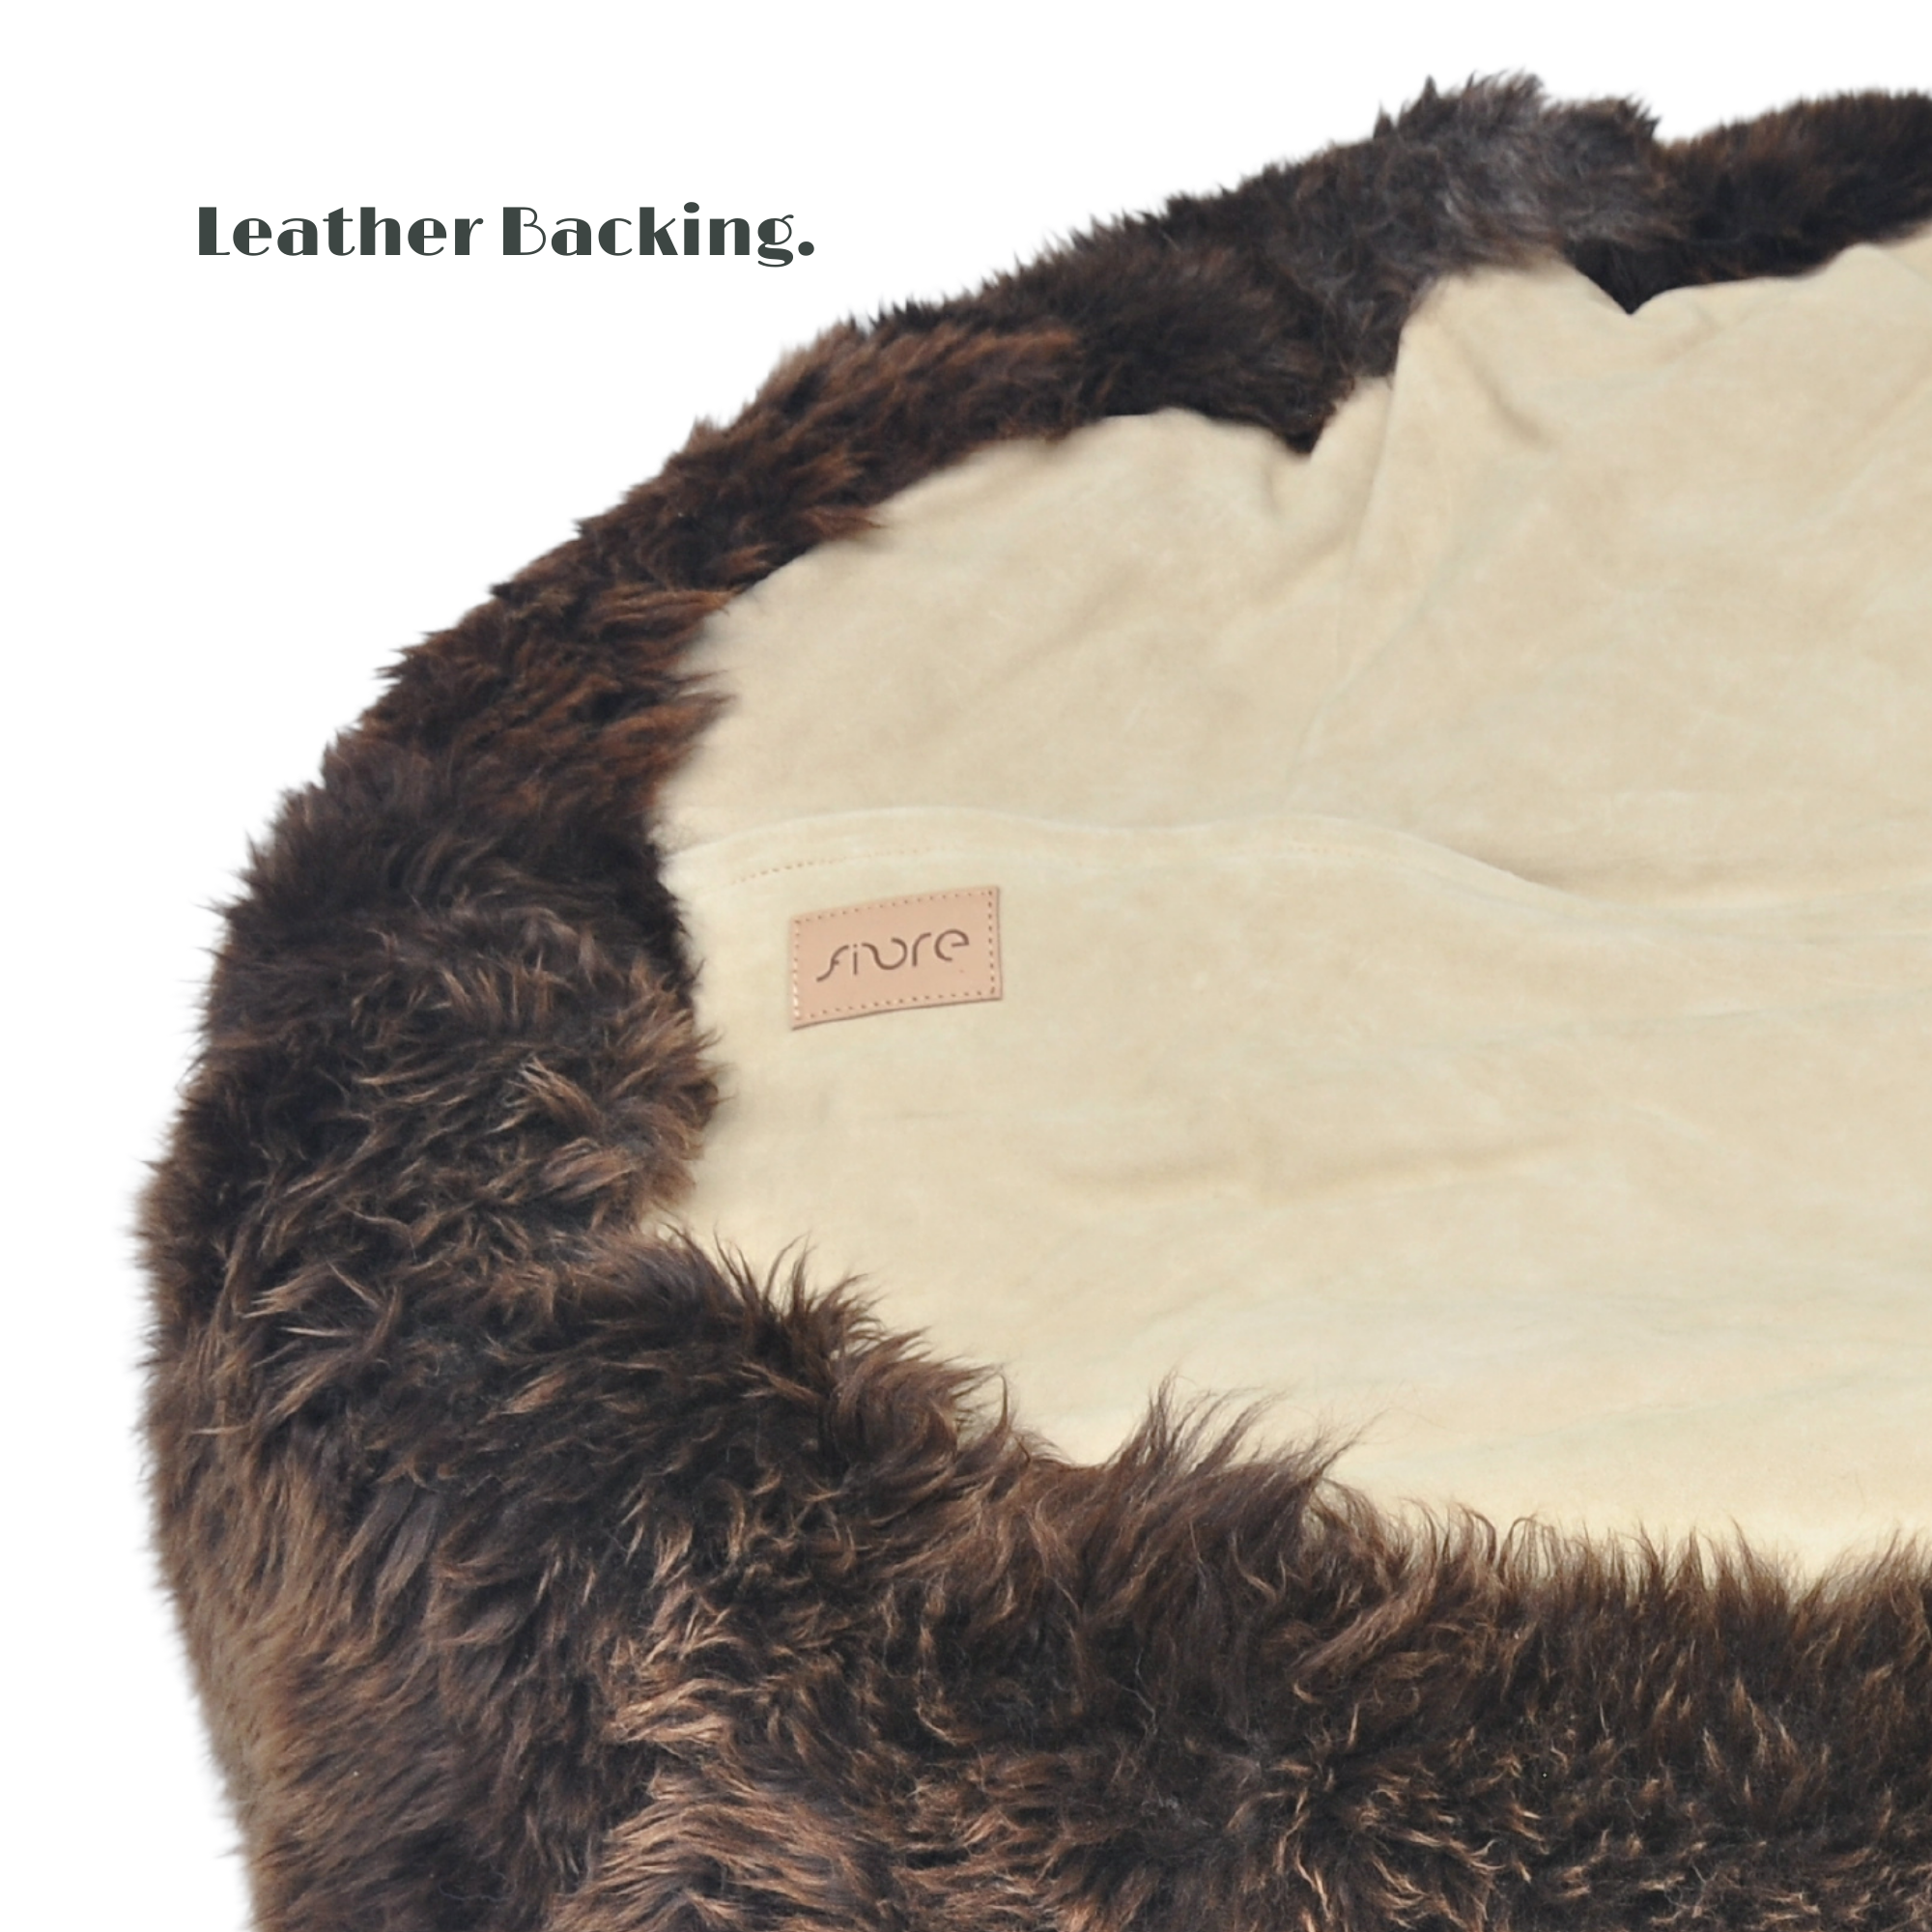 Bottom of a Long Wool Sheepskin Bean Bag • Natural Brown wool. Base is covered with beige suede and a zip closure.